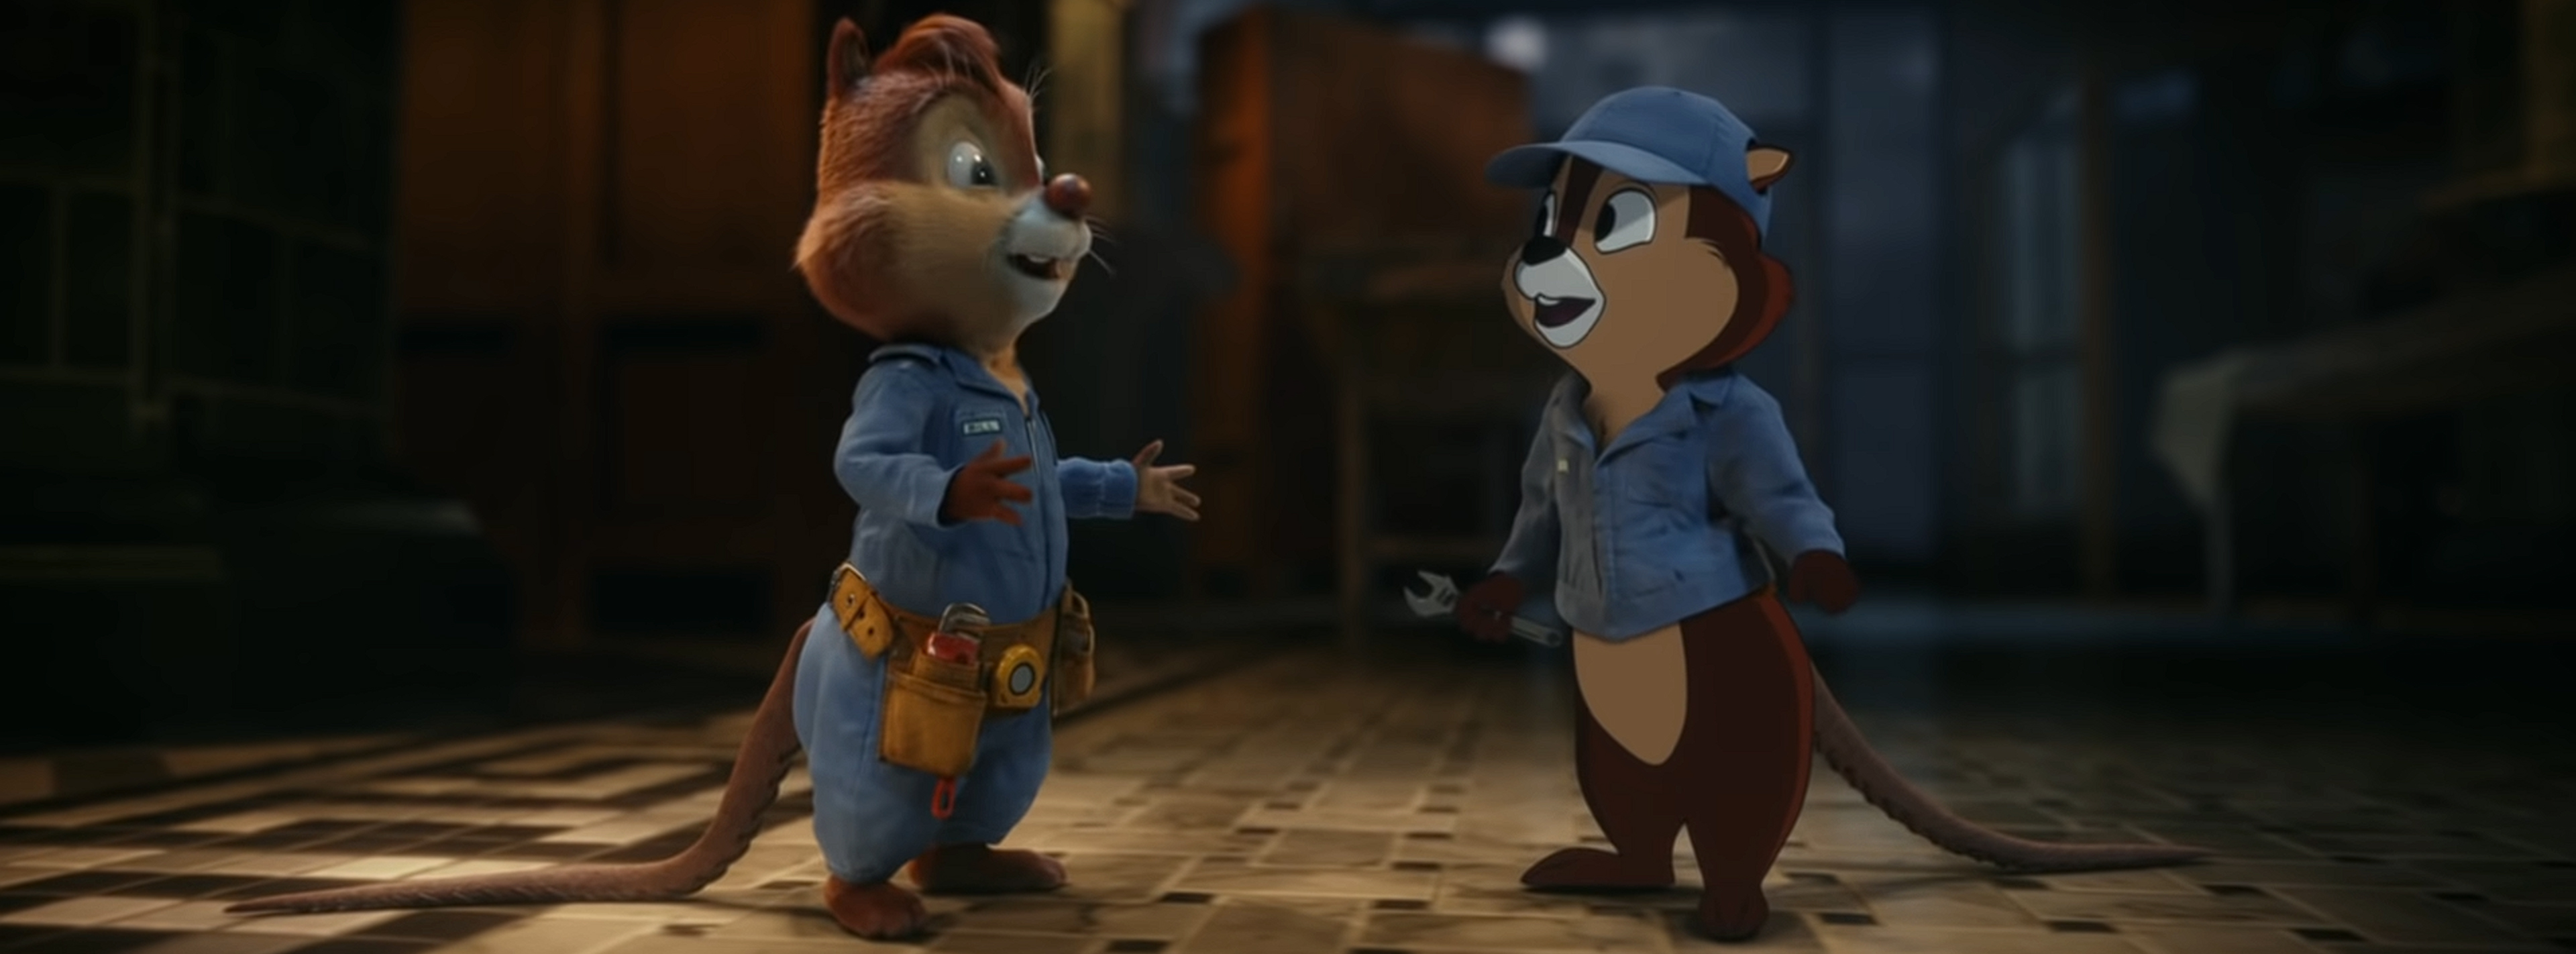 Chip and Dale in disguse